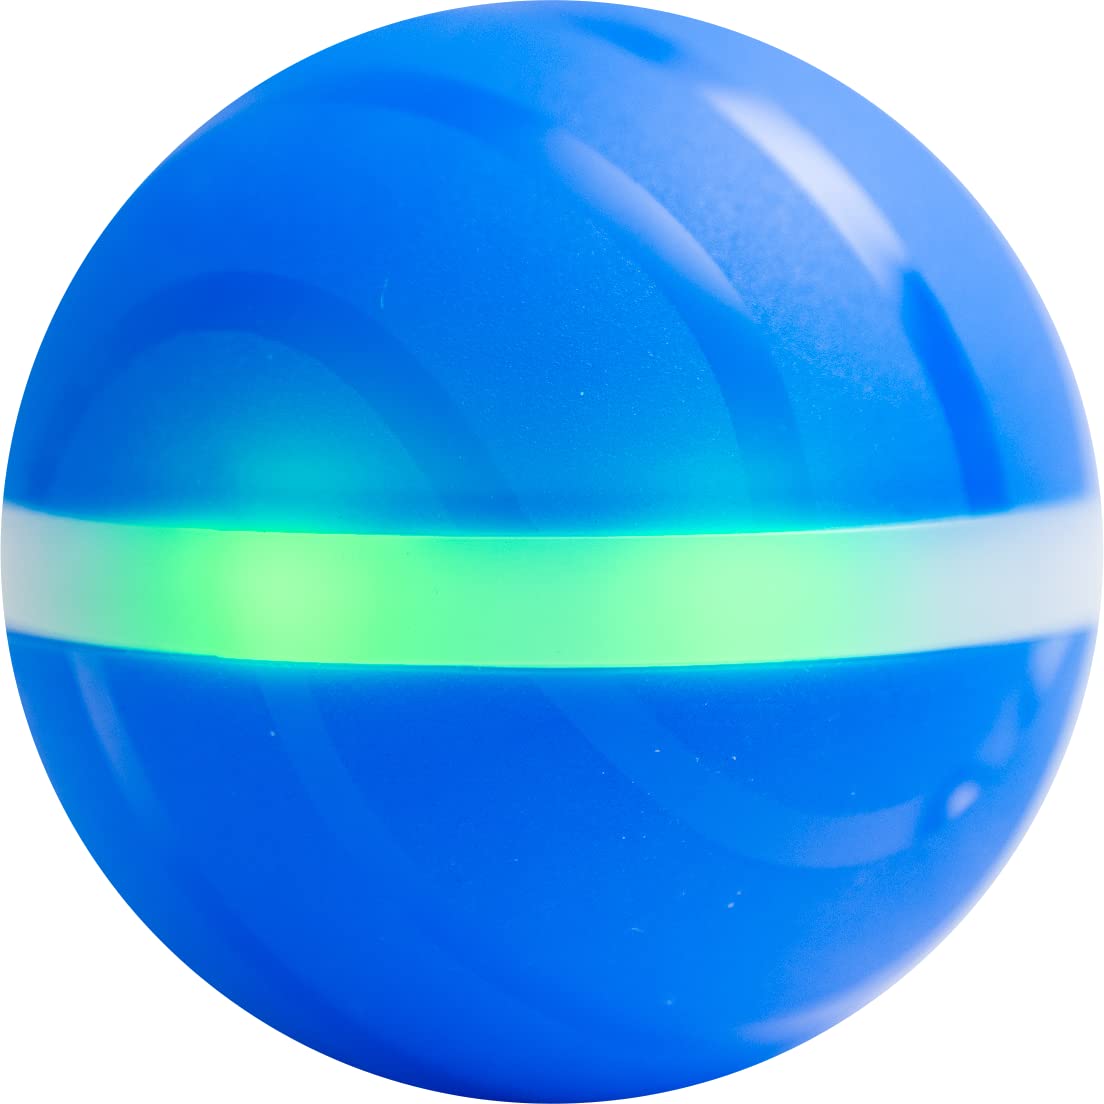 BarxBuddy Busy Ball Review